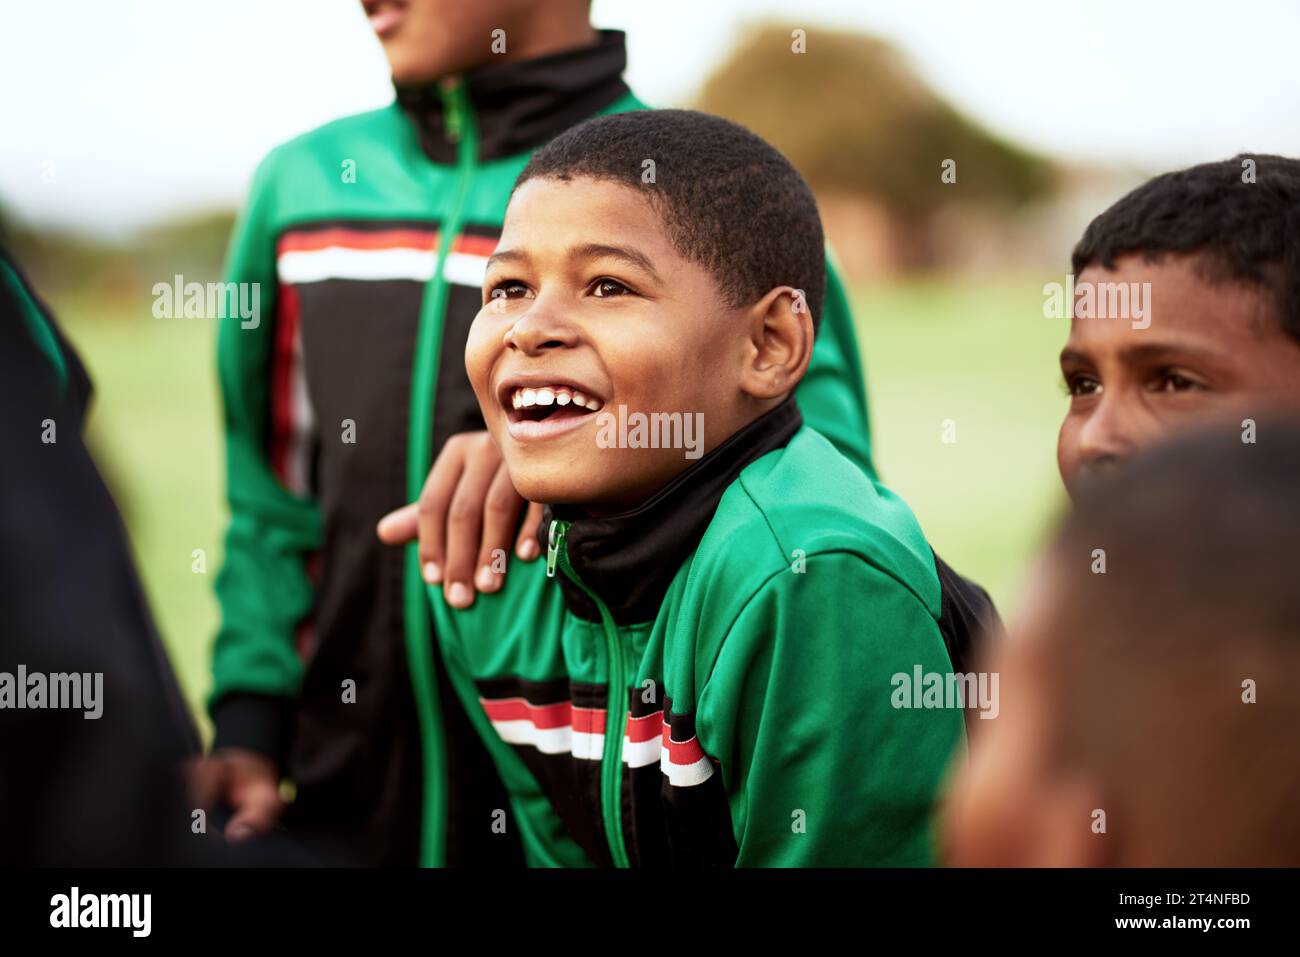 When it comes to soccer, his eyes always sparkle with excitement. a young boy standing alongside his soccer team on a sports field. Stock Photo